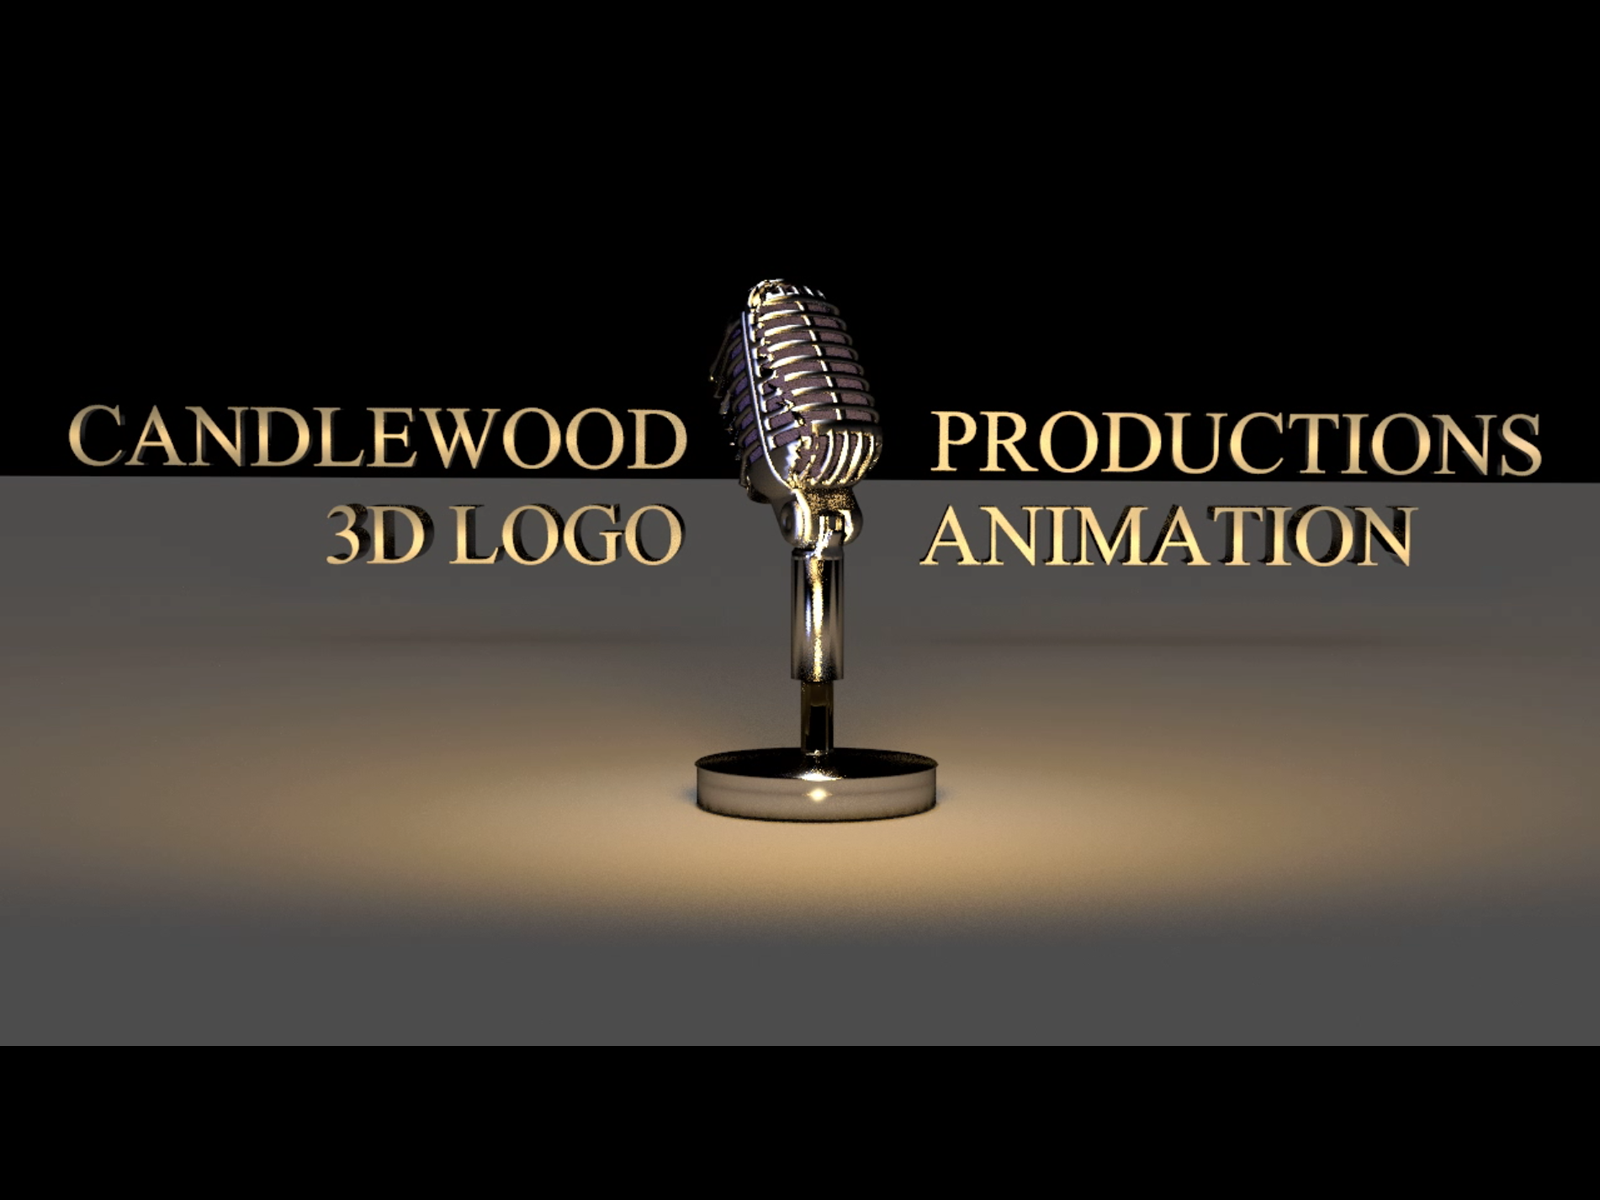 Candlewood 3D